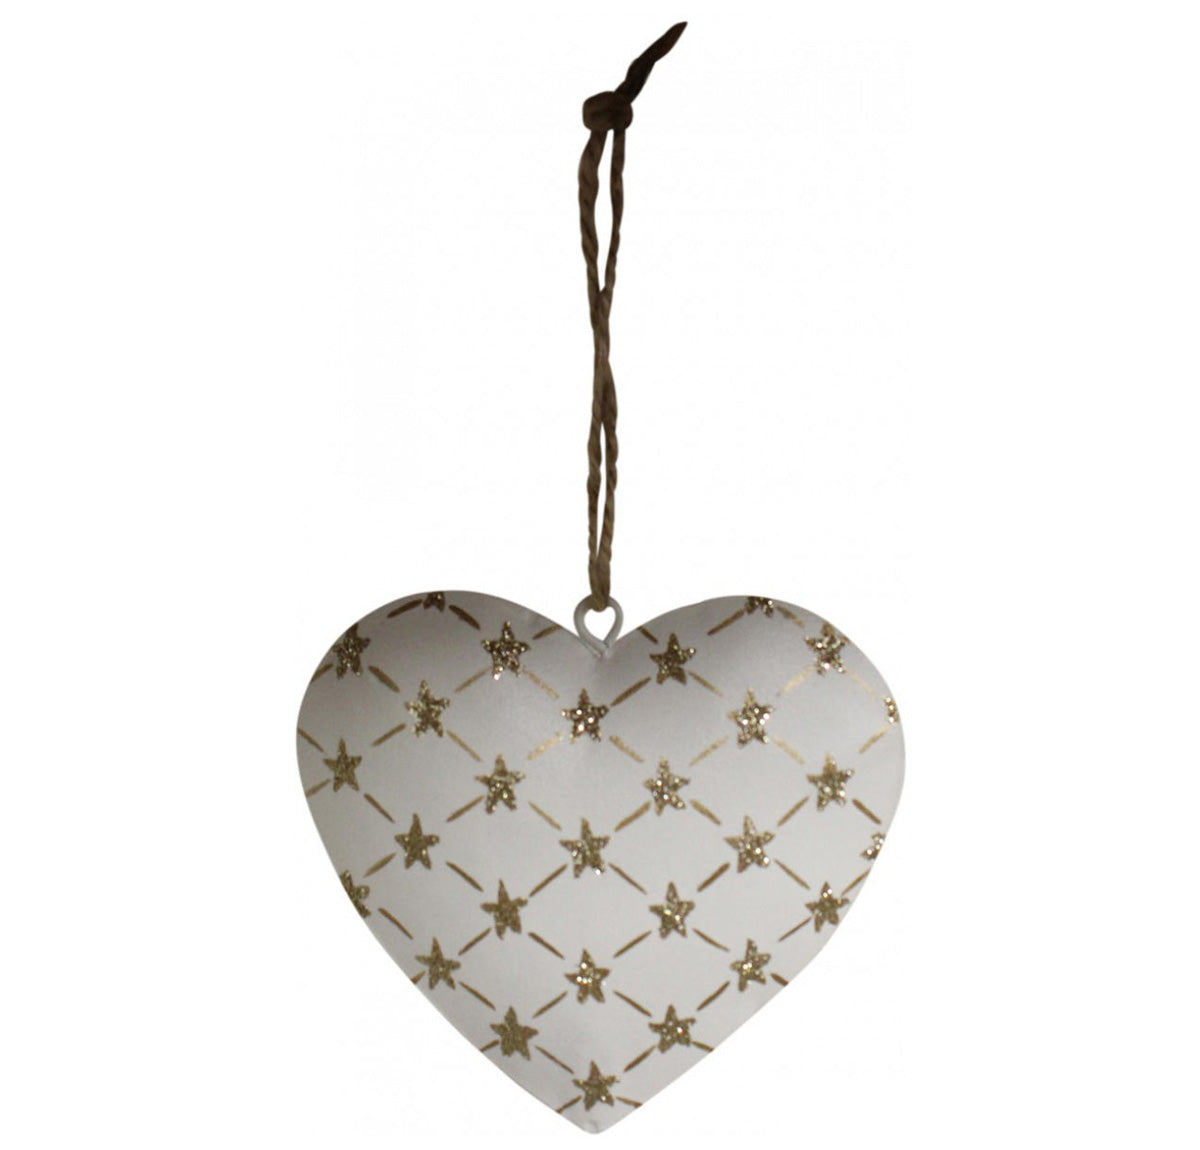 Metal Hanging Heart With Gold Stars - 100mmH | Home Decor